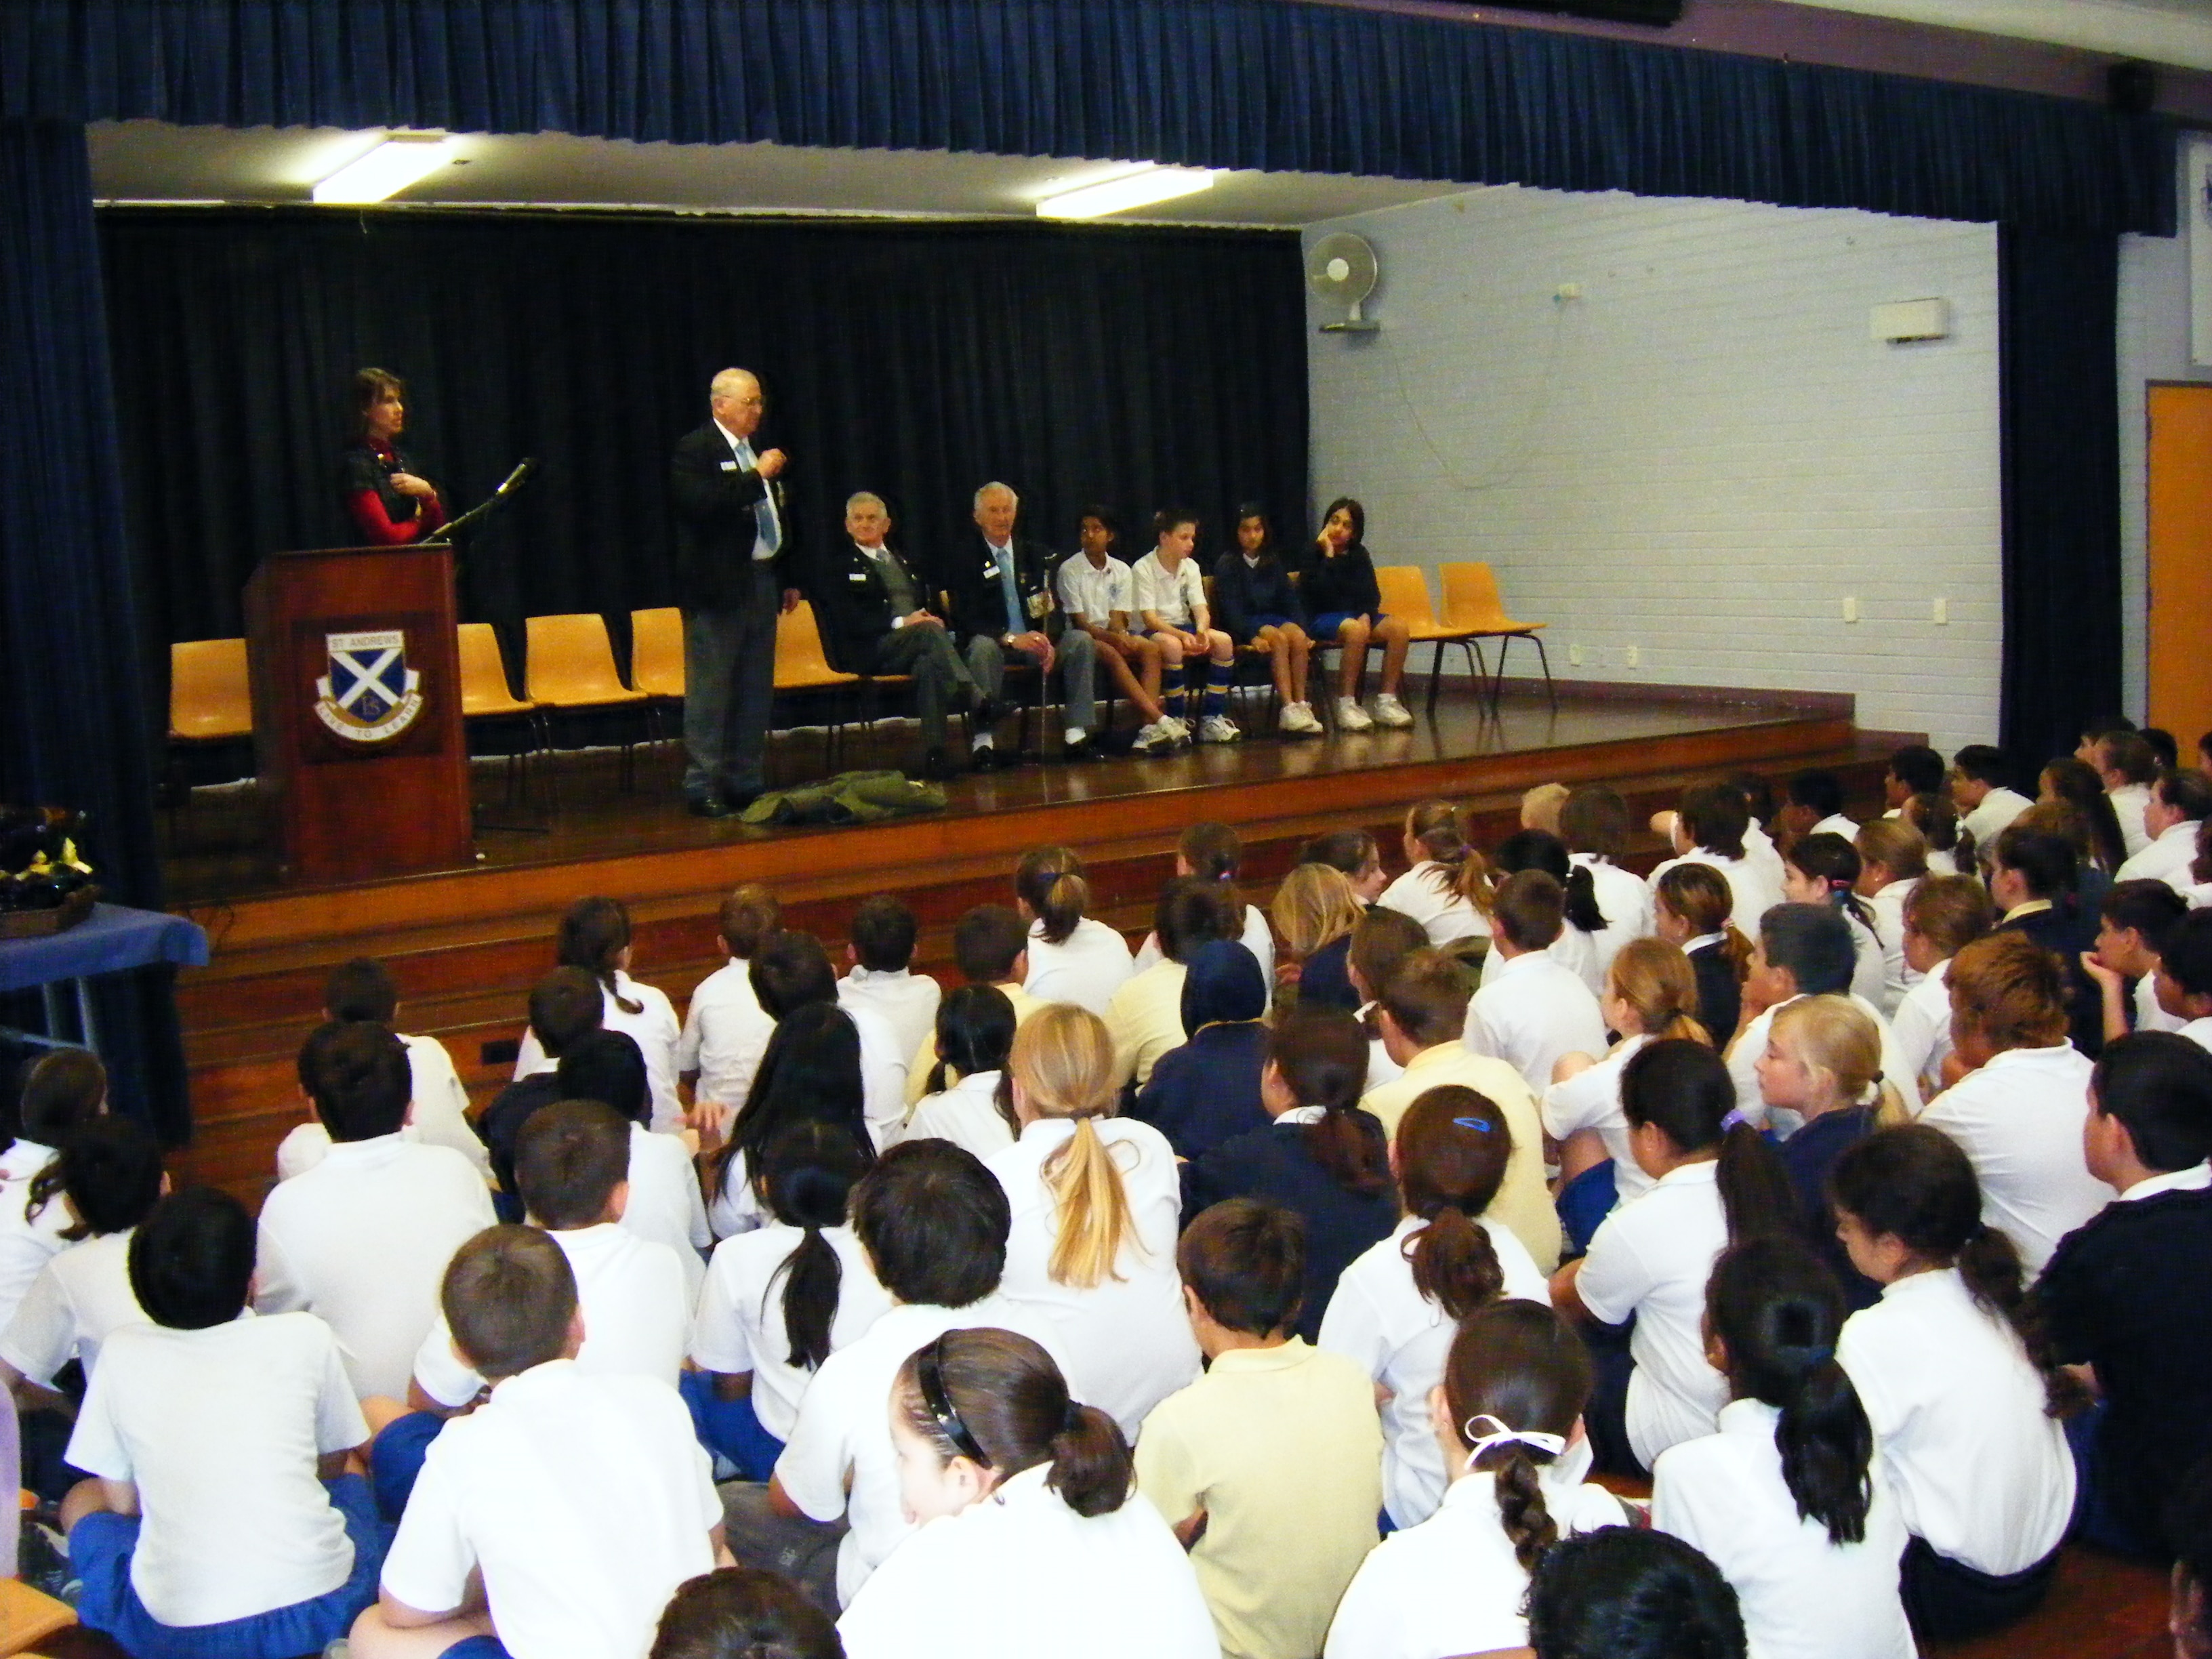 Members of the NSW Korean War Veterans Association share their experience of war with pupils at St Andrews Public School in 2009.